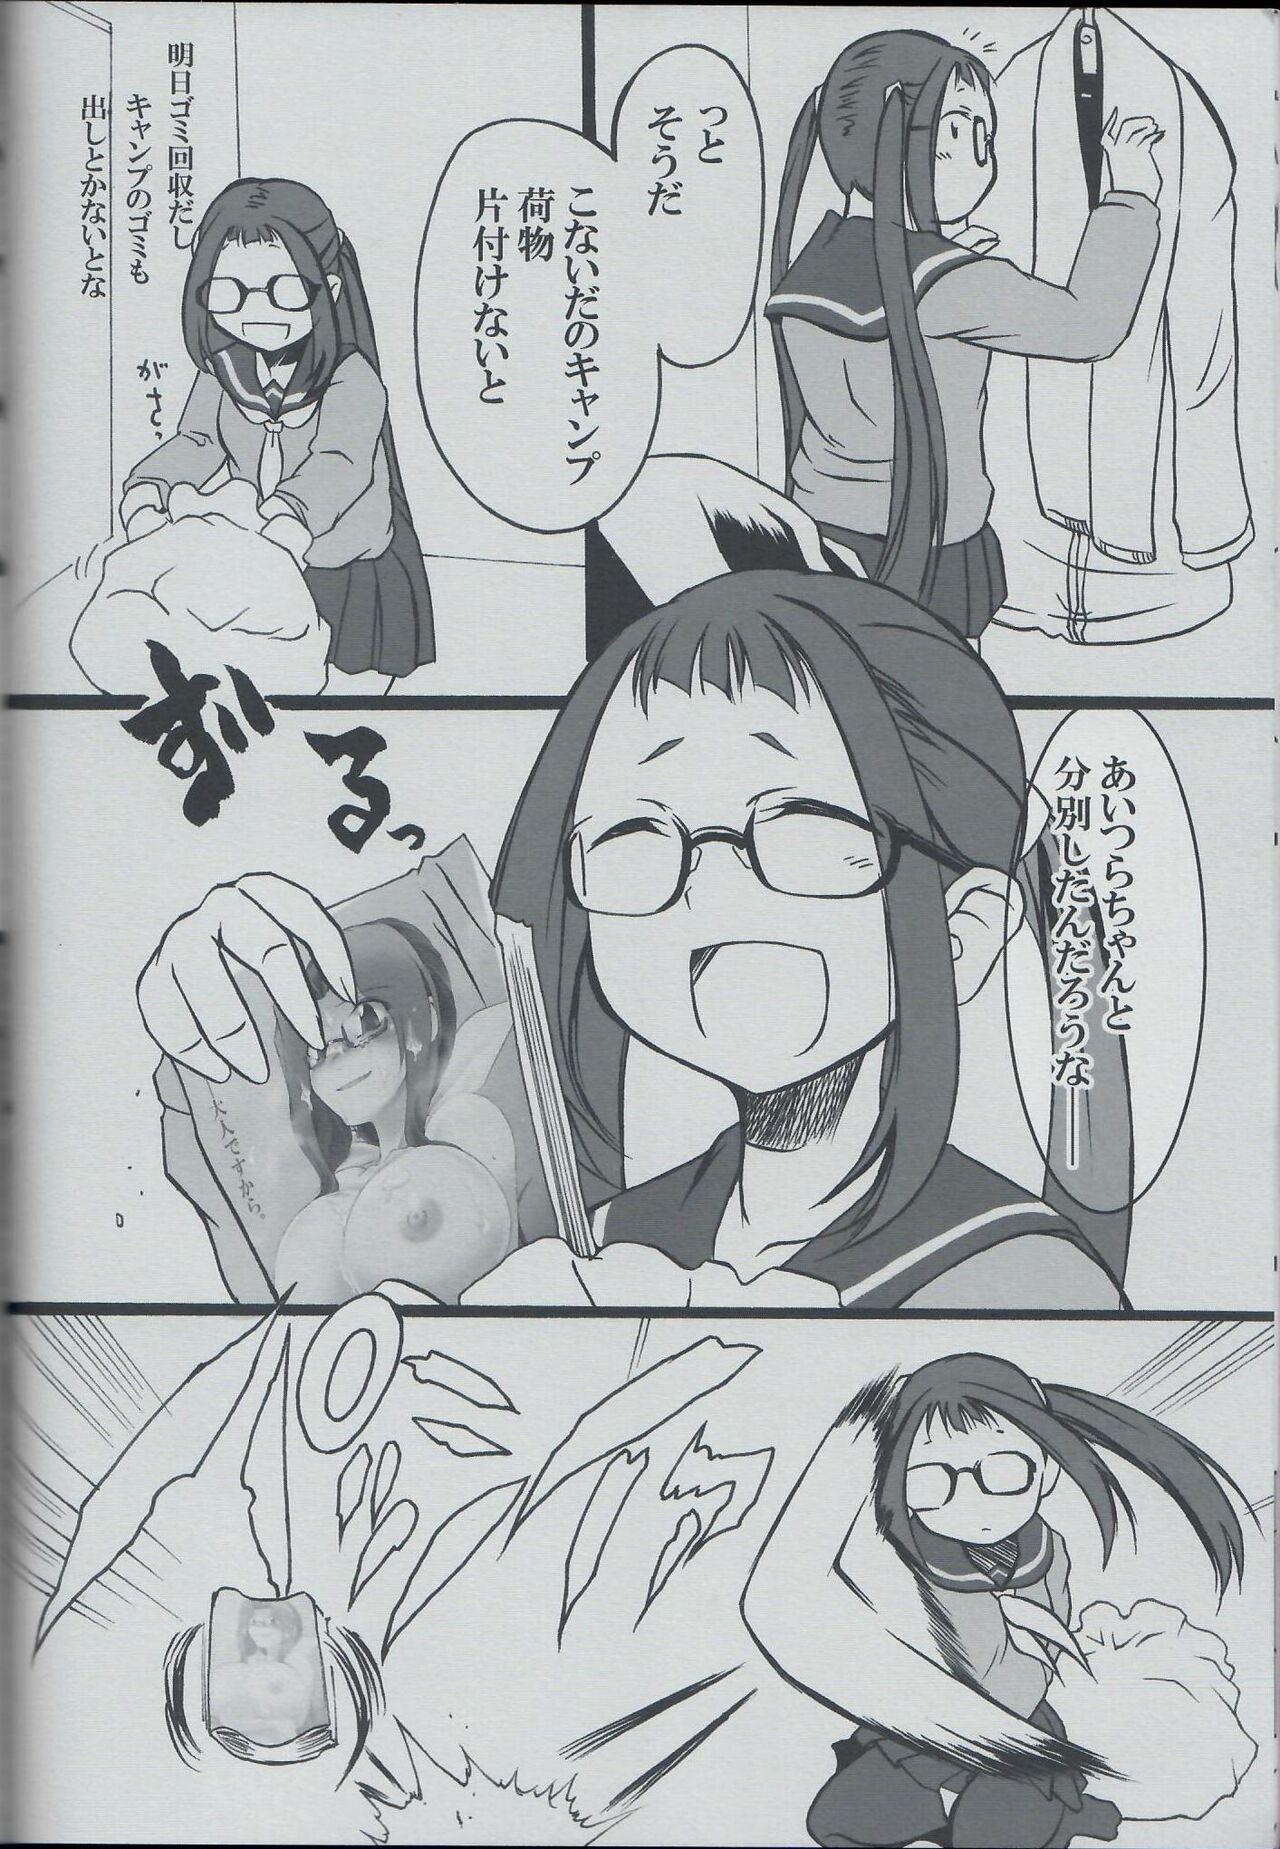 Belly Aki-Chan is a Girl Right!? - Yuru camp | laid back camp Realsex - Page 5